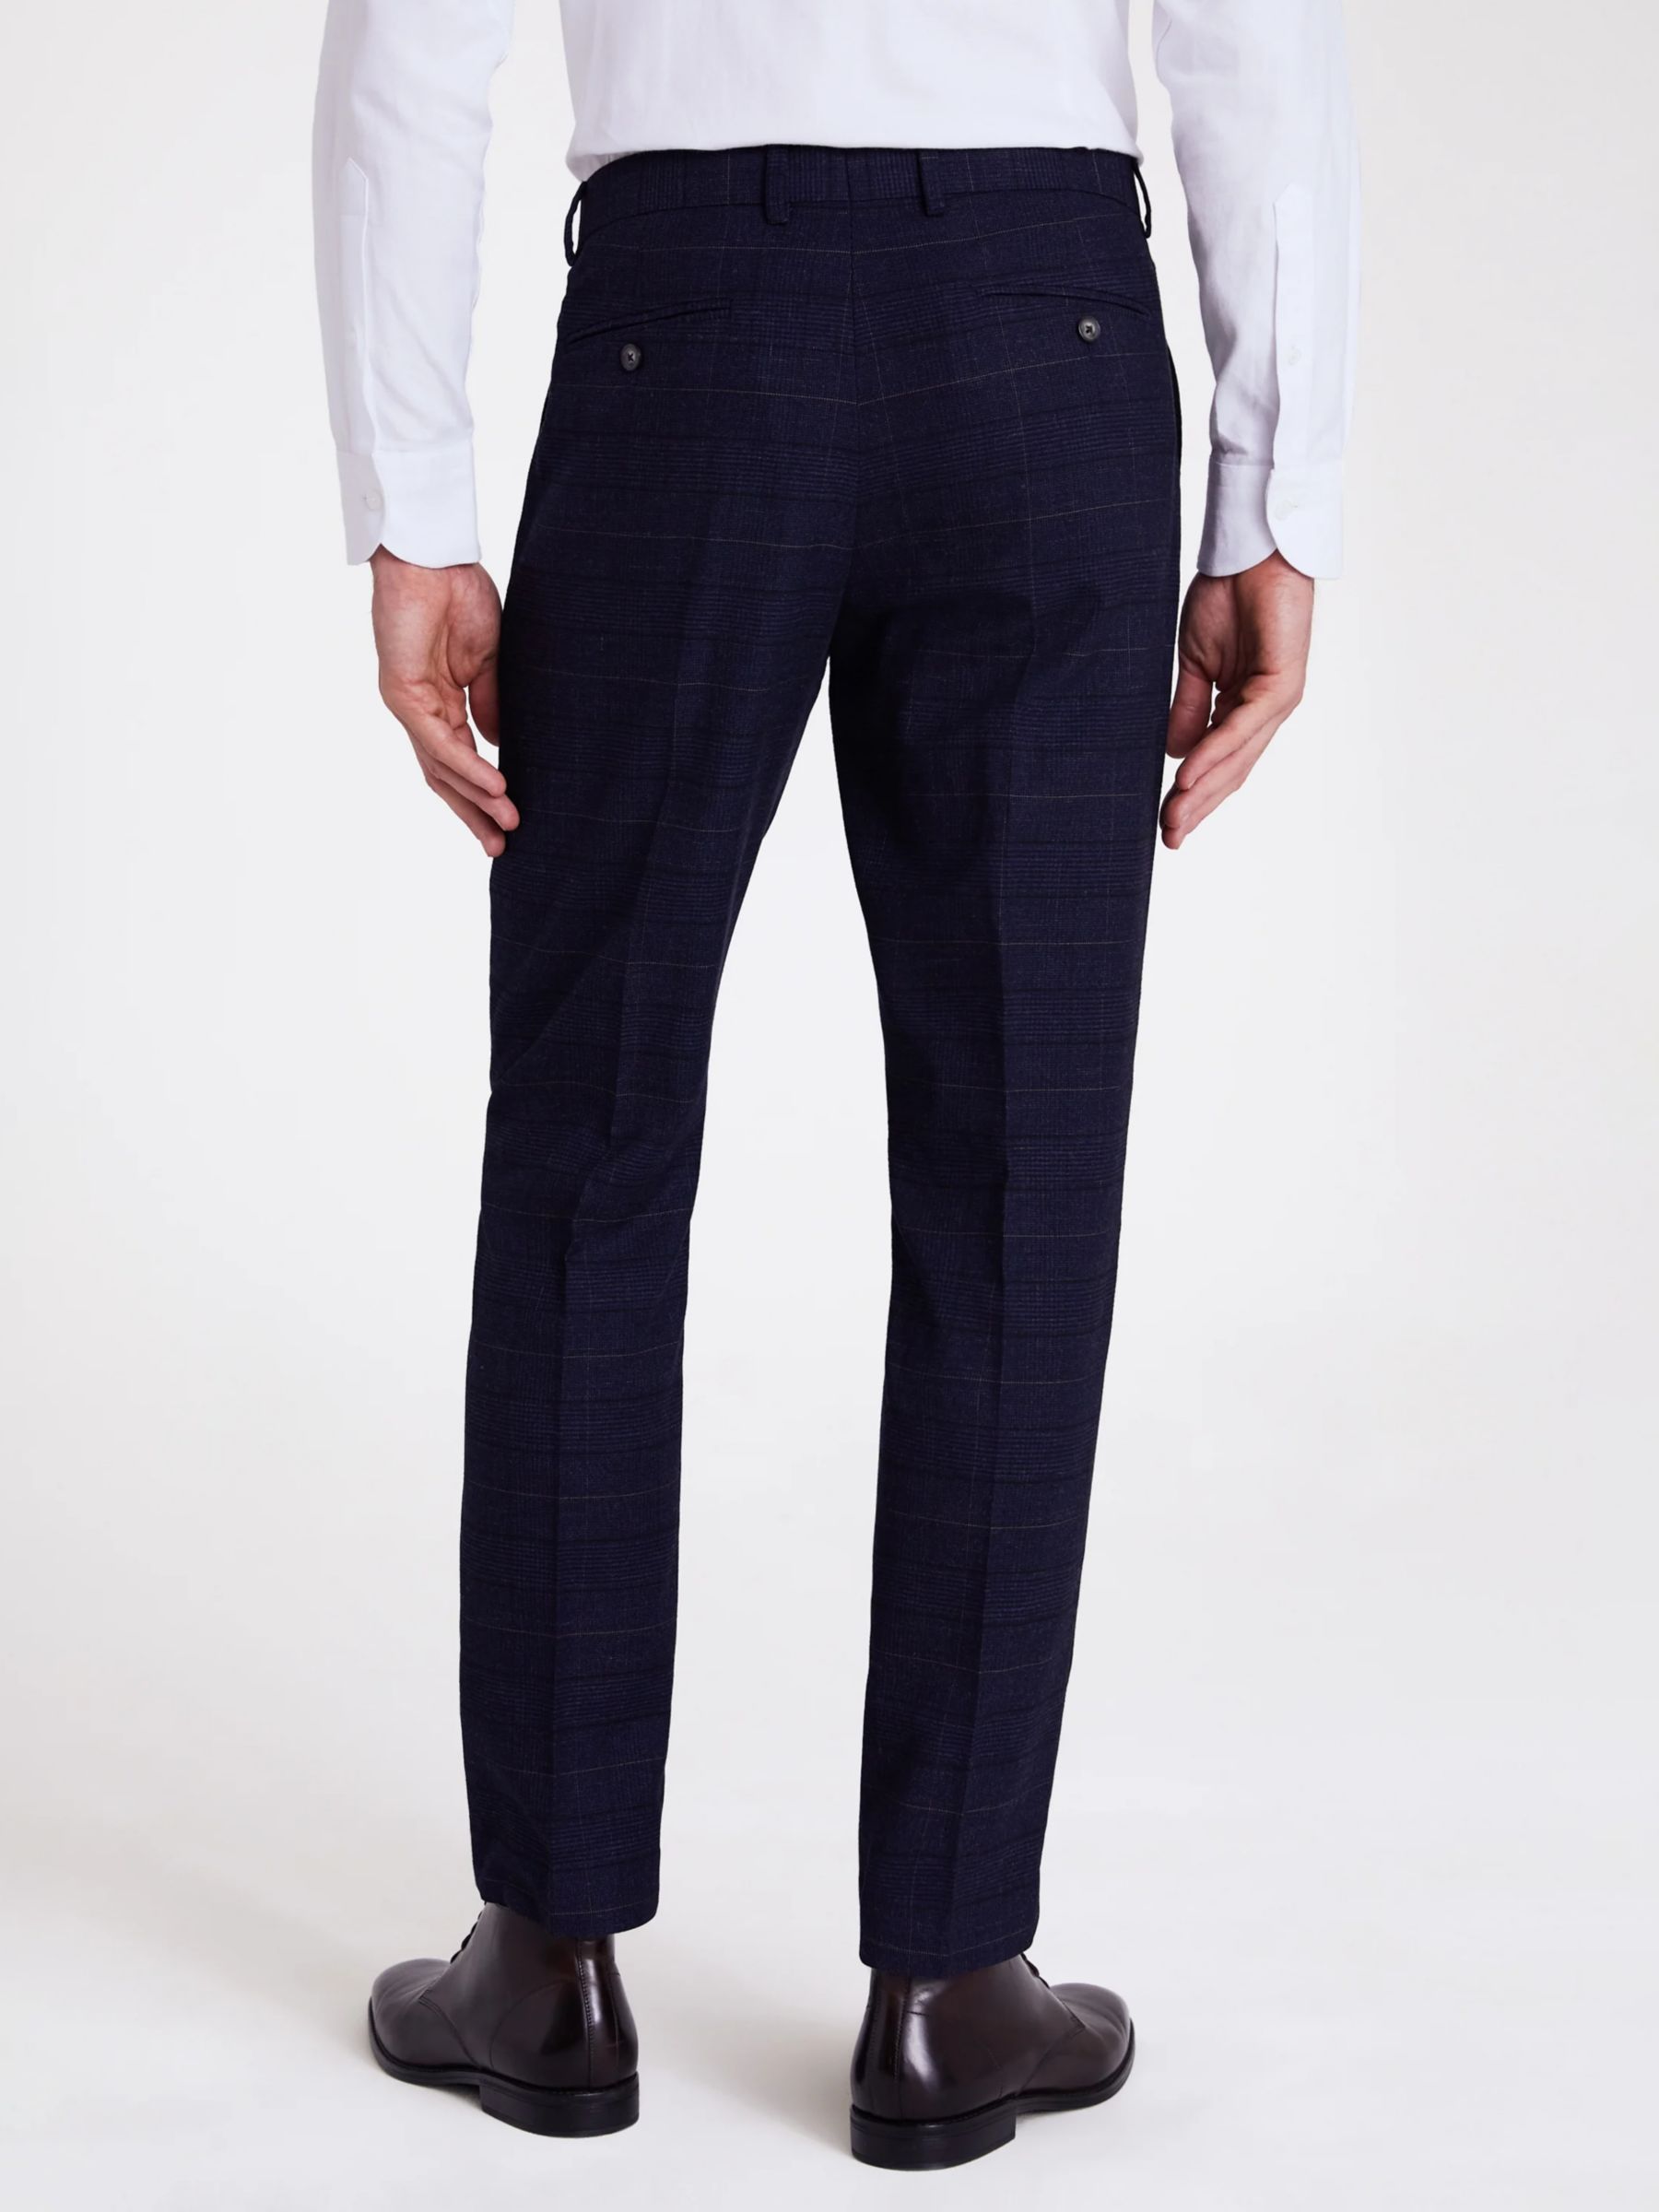 Moss Slim Check Suit Trousers, Navy/Black, 28S